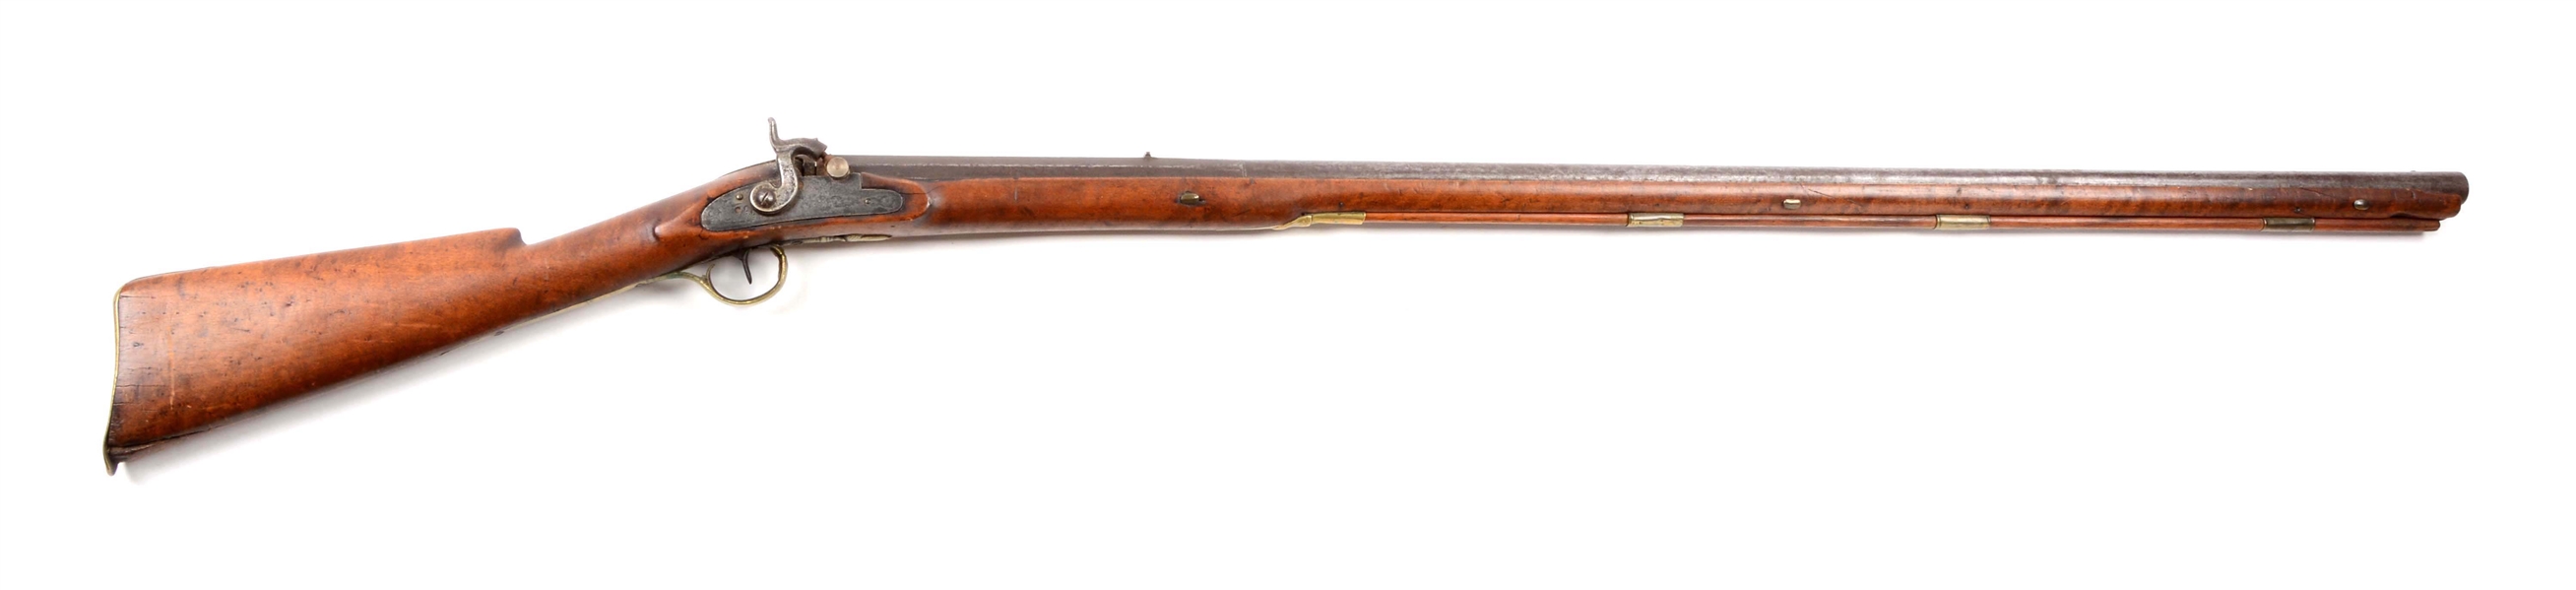 (A) FULLSTOCK NEW ENGLAND PERCUSSION RIFLE.